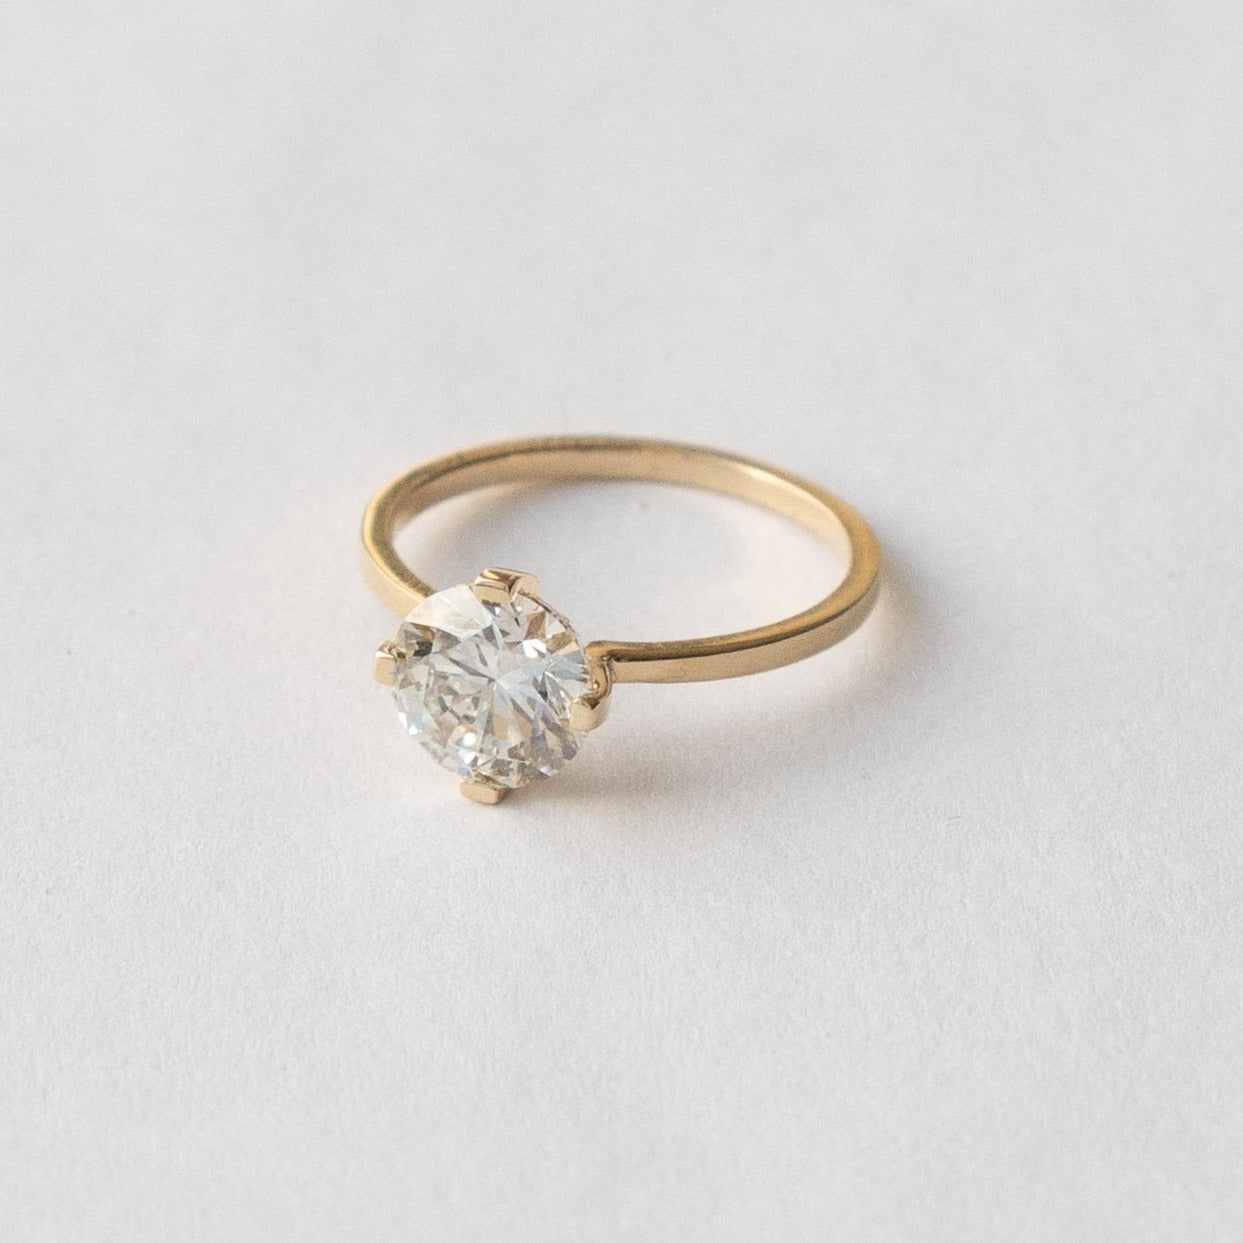 Ema Unique Ring in 14k Gold set with 1.66ct round brilliant cut lab-grown diamond By SHW Fine Jewelry NYC